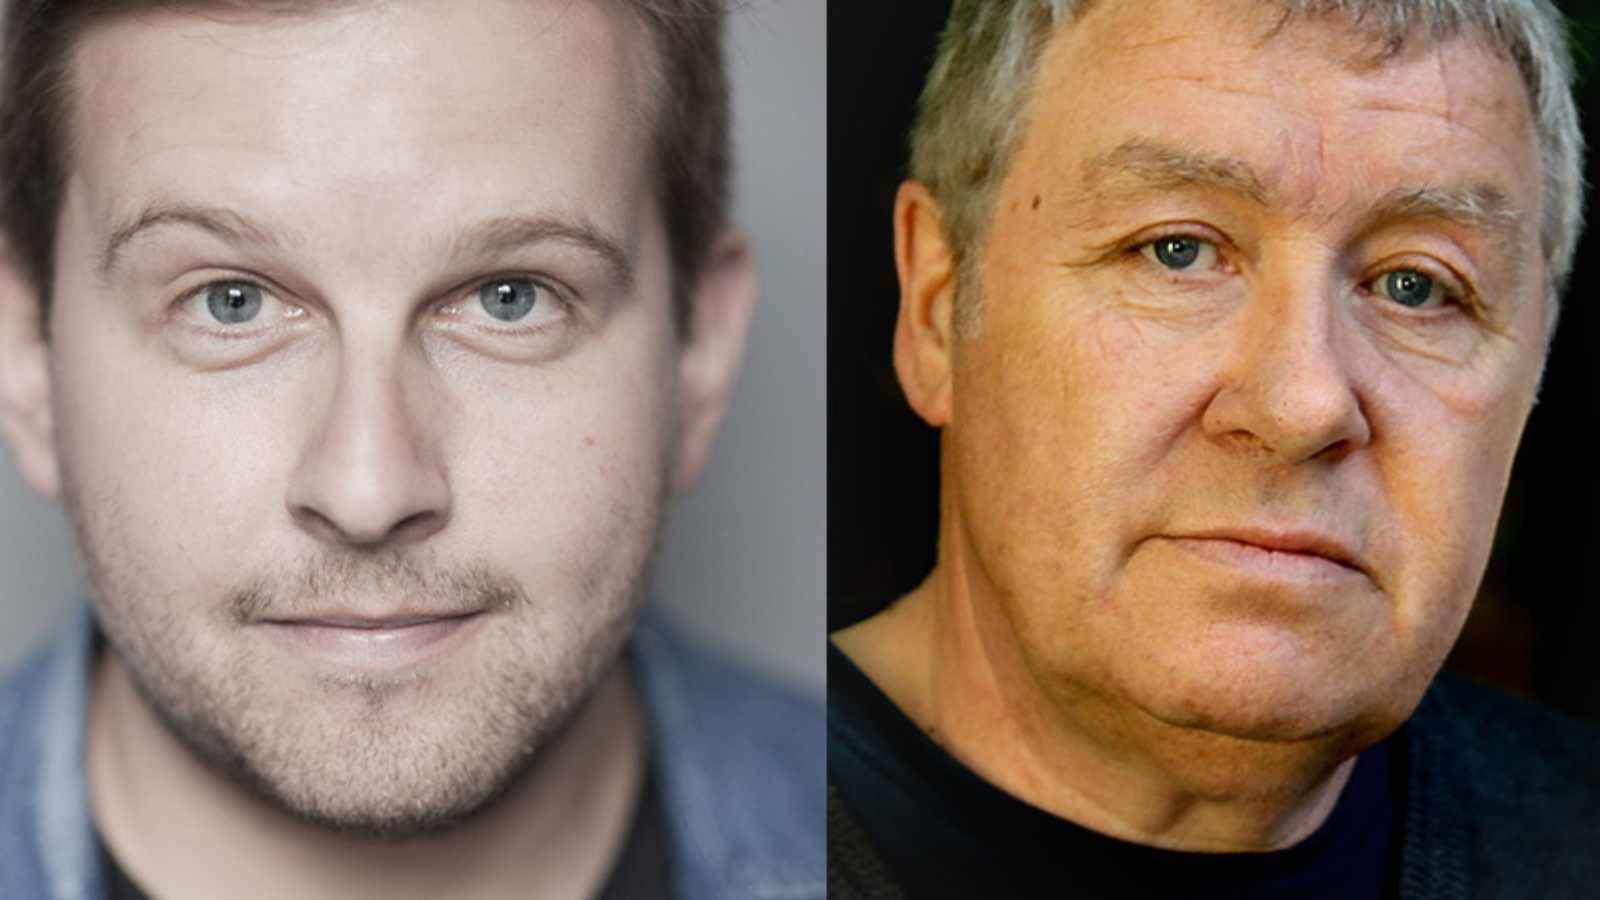 The image features headshots of two men side by side. The first is actor Greg McHugh and the second is actor Gregor Fisher.